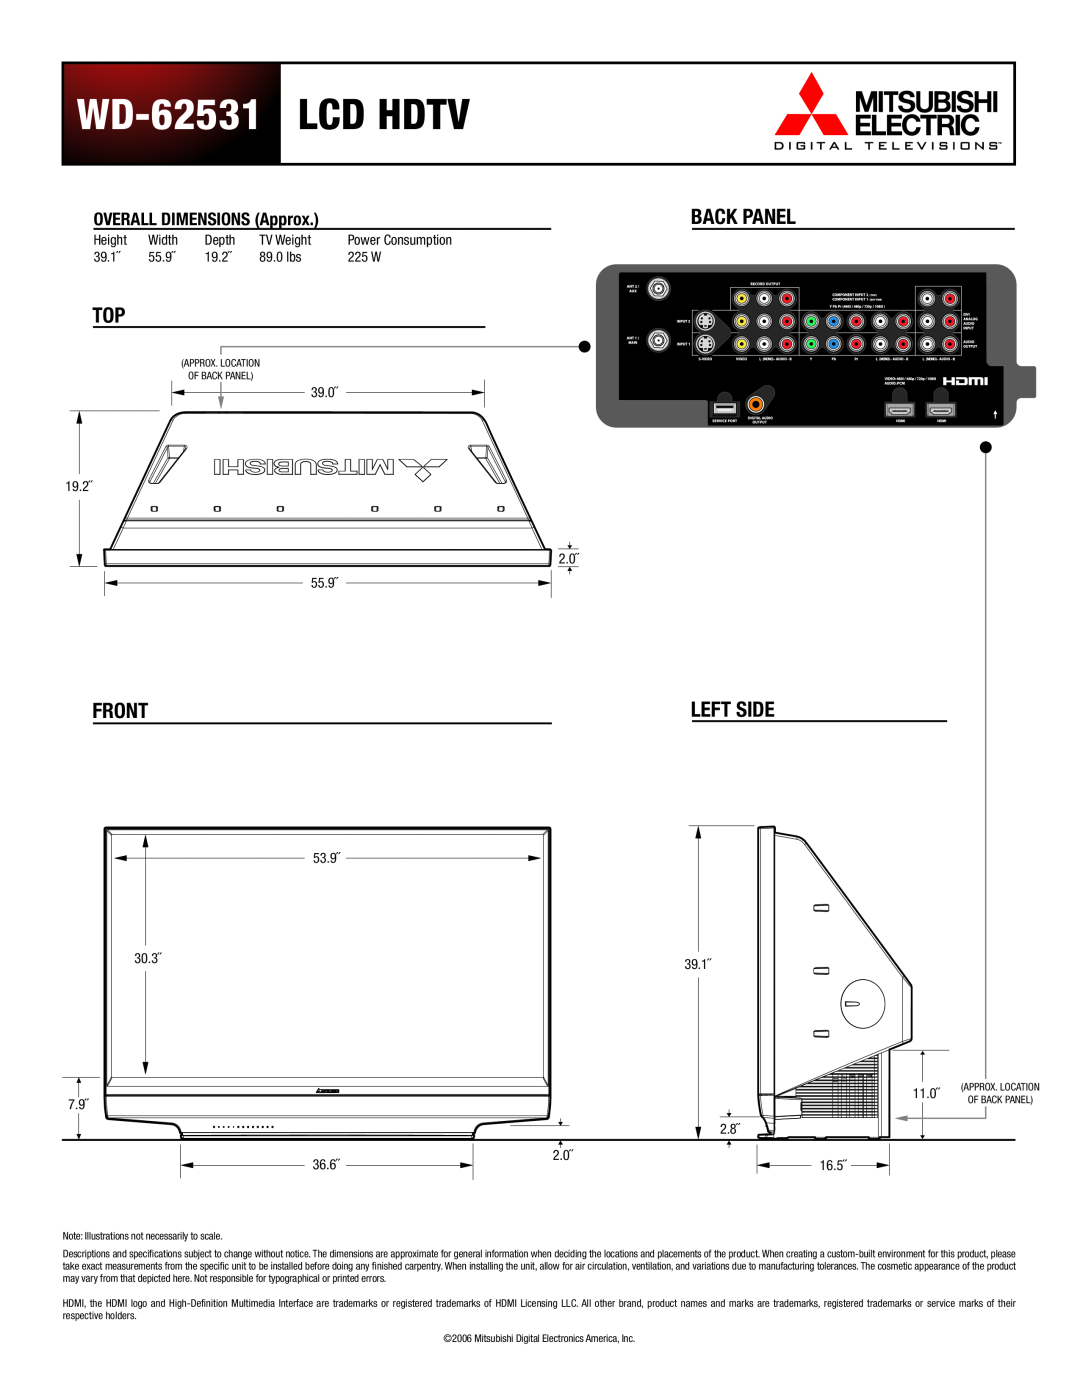 Mitsubishi Electronics dimensions WD-62531 LCD HDTV, Back Panel, Front, Left Side, OVERALL DIMENSIONS Approx 